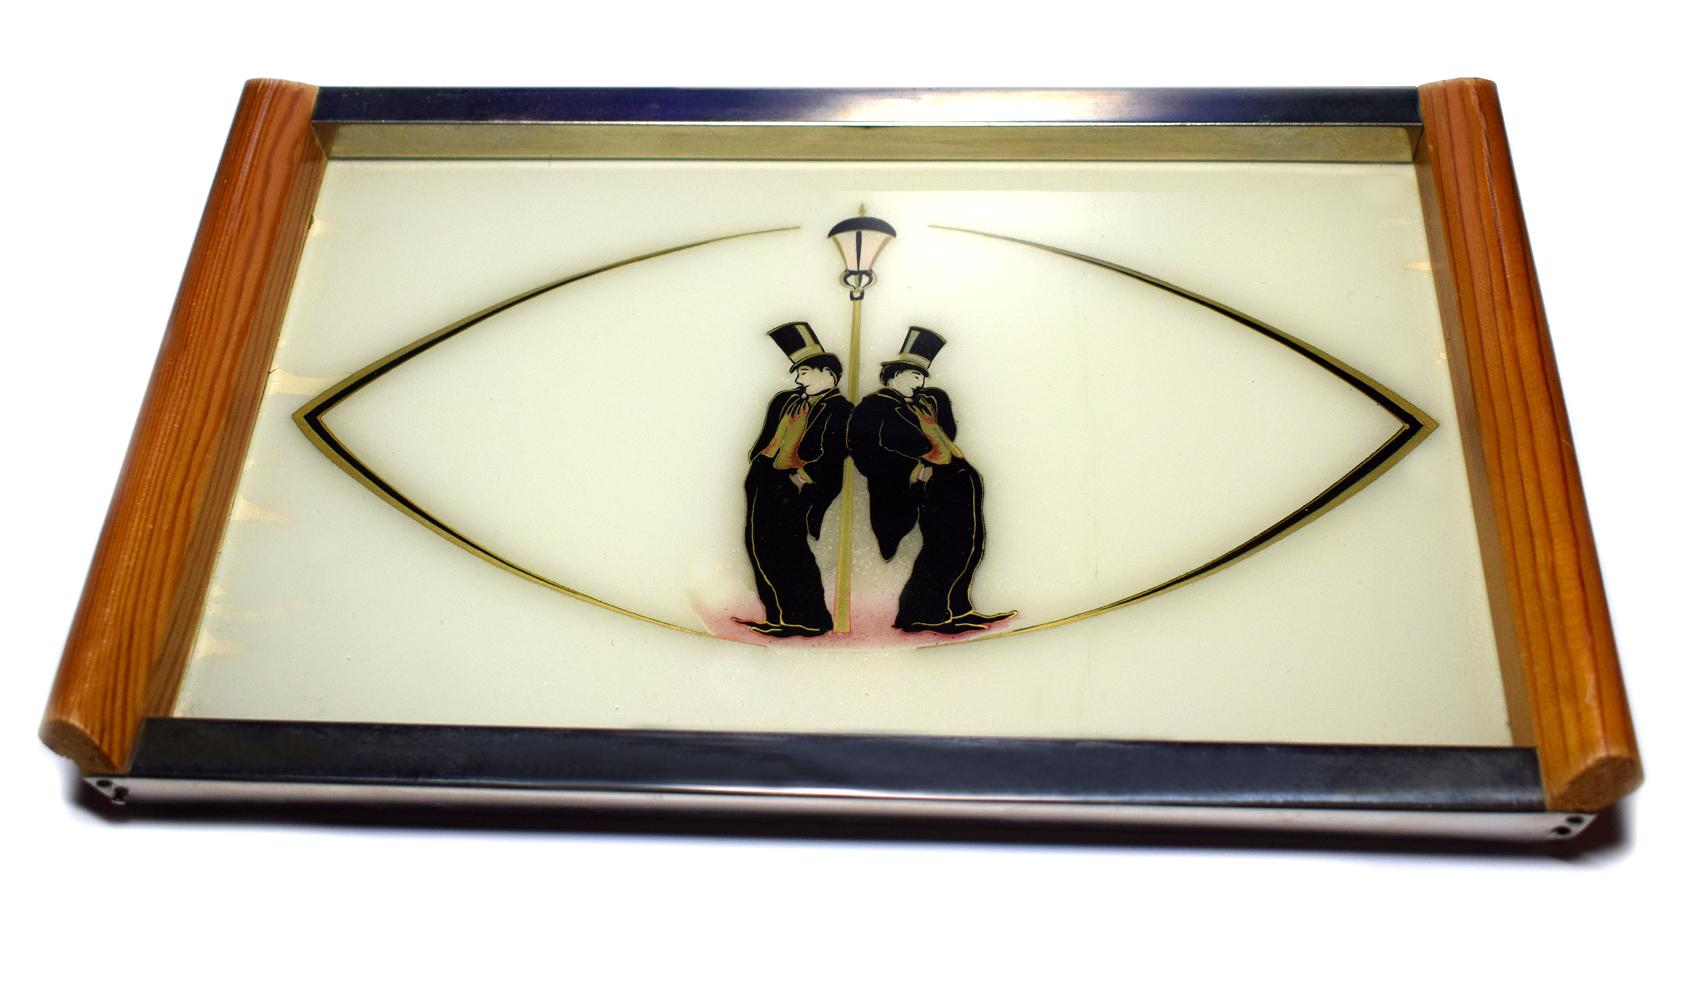 A rare and very collectable 1930s Art Deco cocktail drinks tray depicting two stylized Charlie Chaplin's leaning against a lamp post. Very charming and also classy. Ideal size for modern day use or just to enhance a bar setting. Condition is very